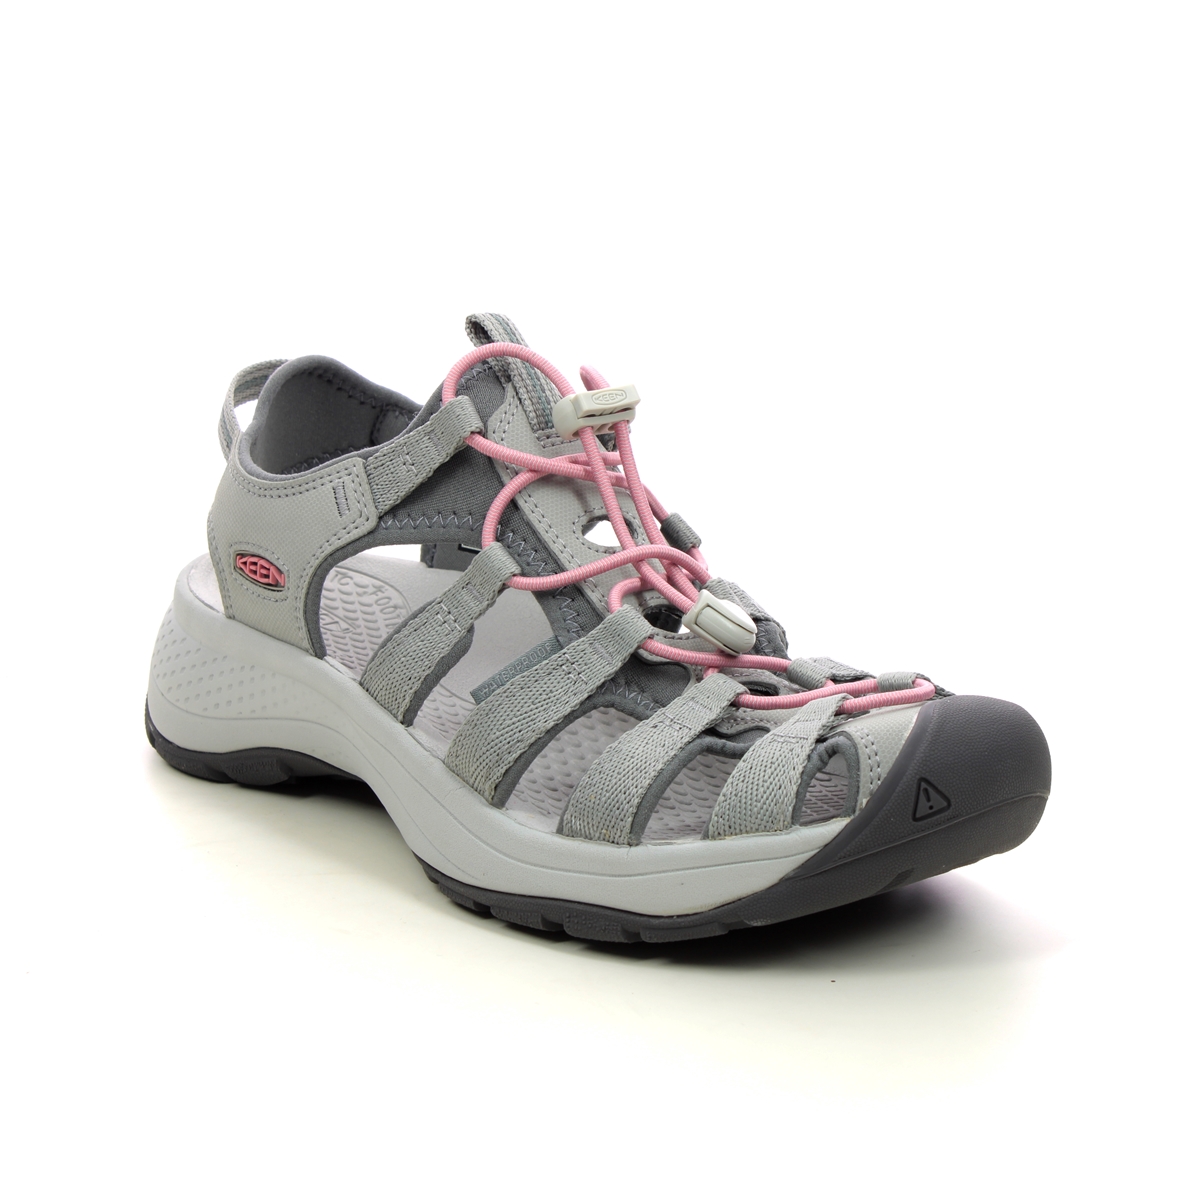 Keen Astoria West Light grey Womens Closed Toe Sandals 1023589- in a Plain Man-made in Size 4